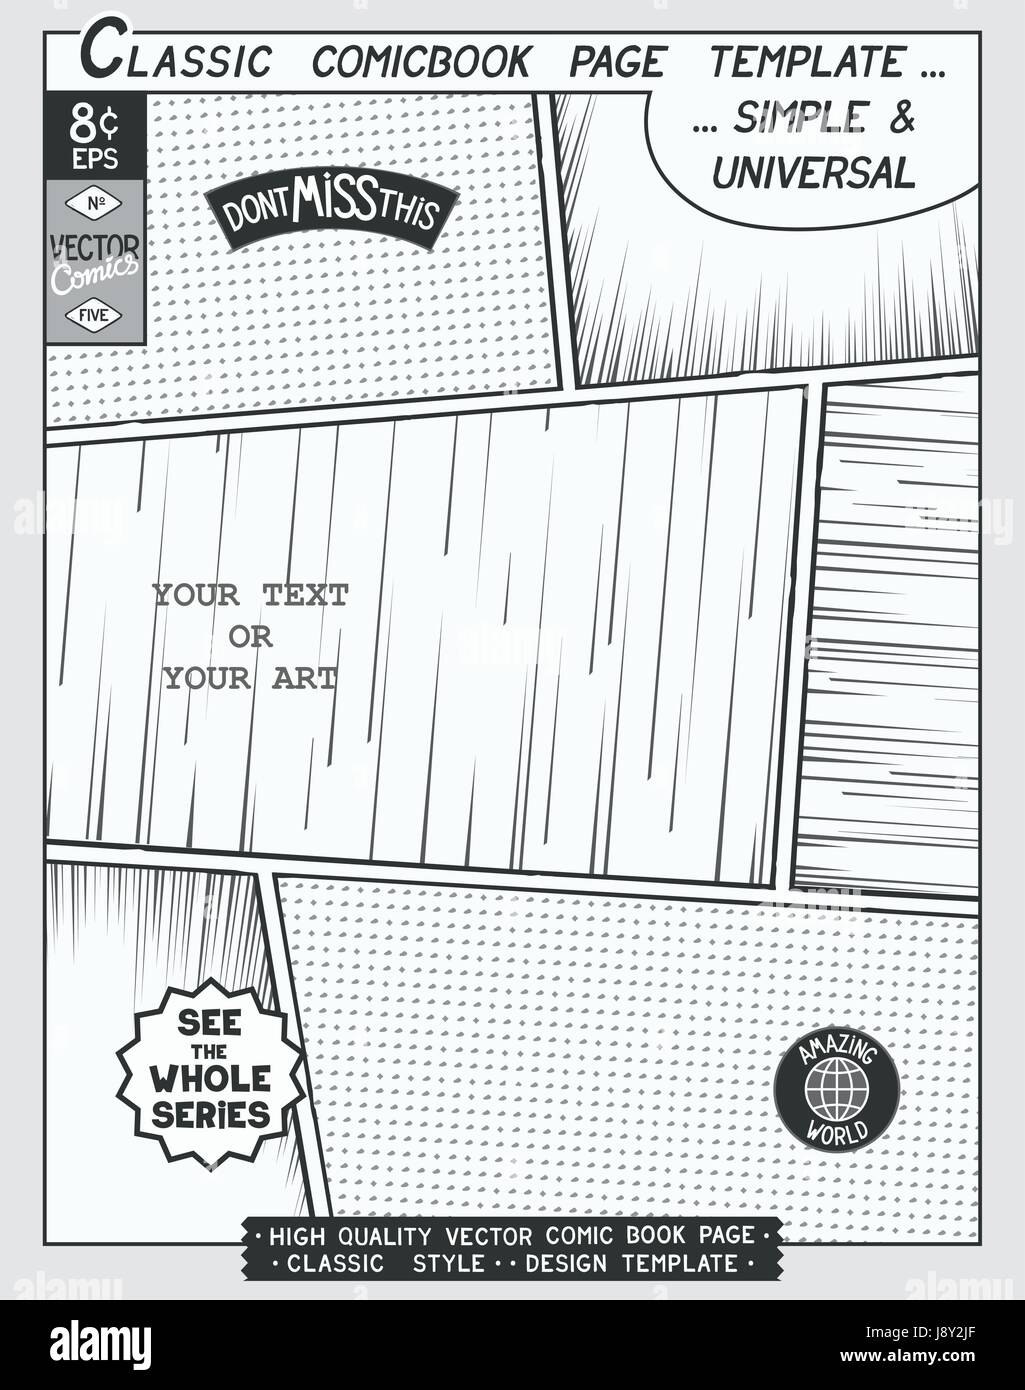 Free space Comic book page template. Comics layout and action with